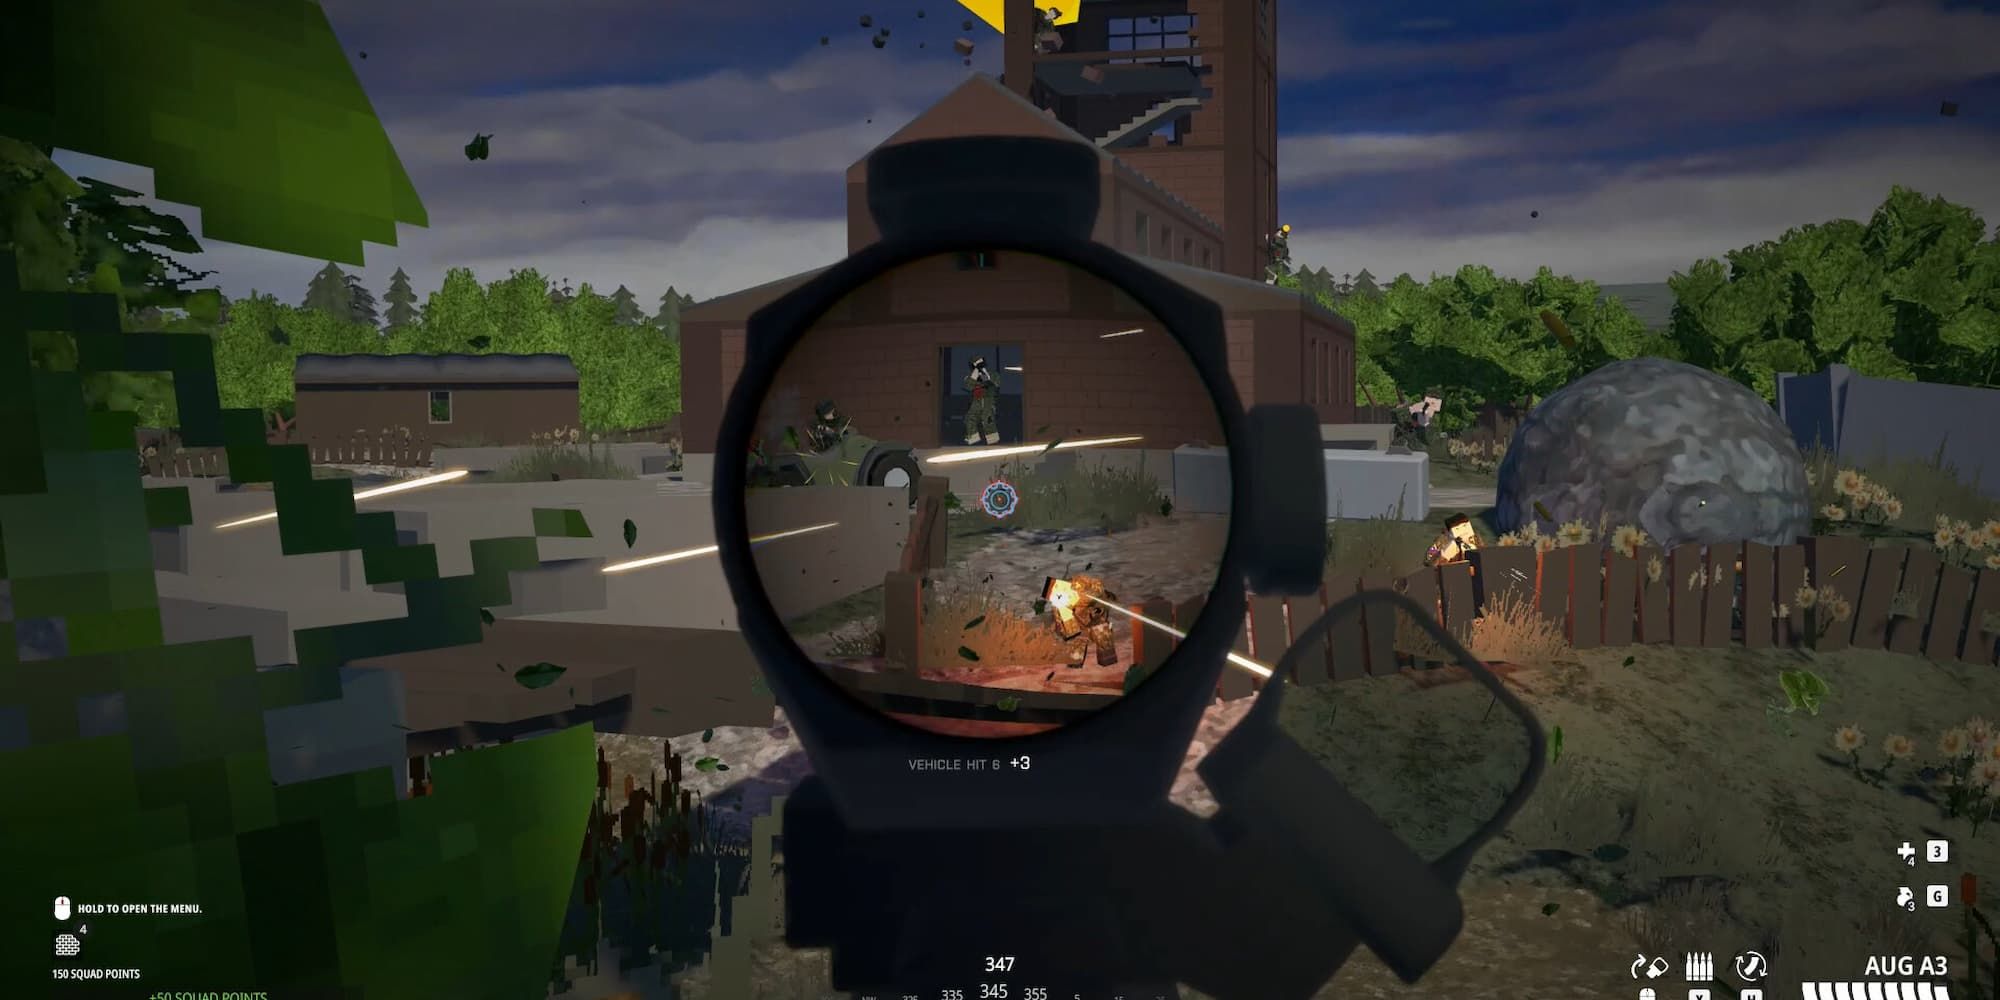 A player aims down the sight of his weapon against several enemies in the Frontline mode of BattleBit Remastered.